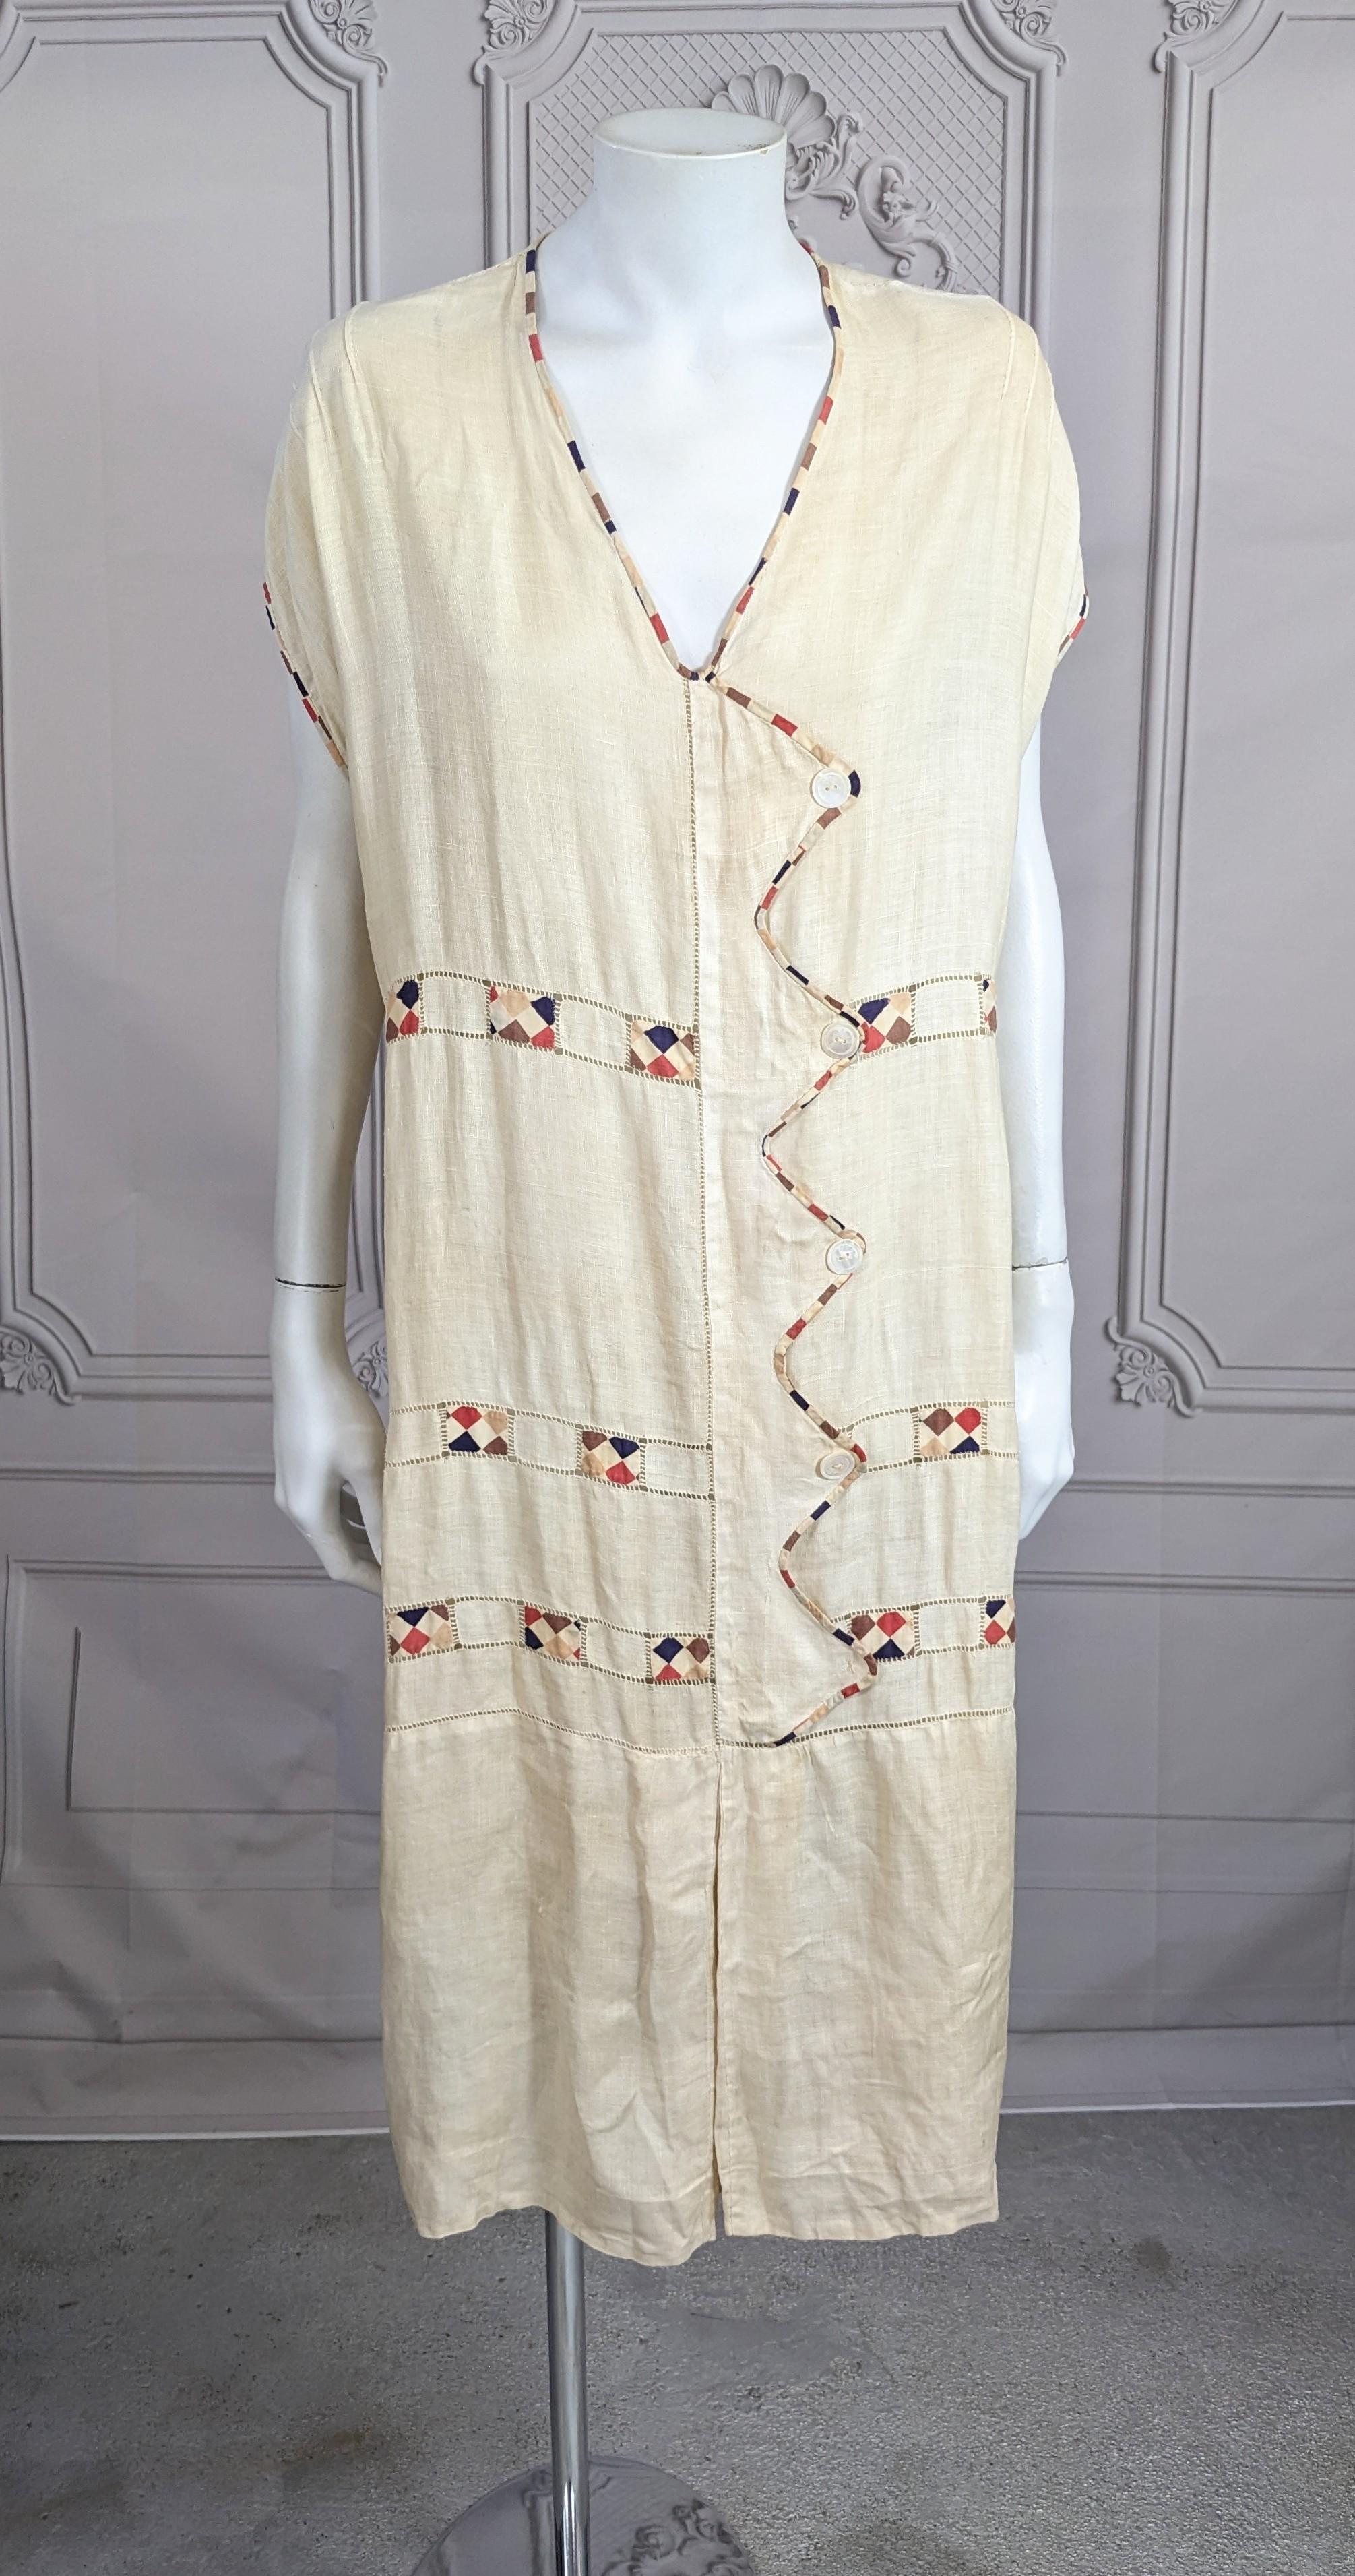 Charming 1920's European Linen Day Dress from the 1920's. Simple straight shape with printed bias cotton tape and openwork detailing on edges. Mother of pearl button accents. High Art Deco styling inspiration. Easy tubular fit with small inverted